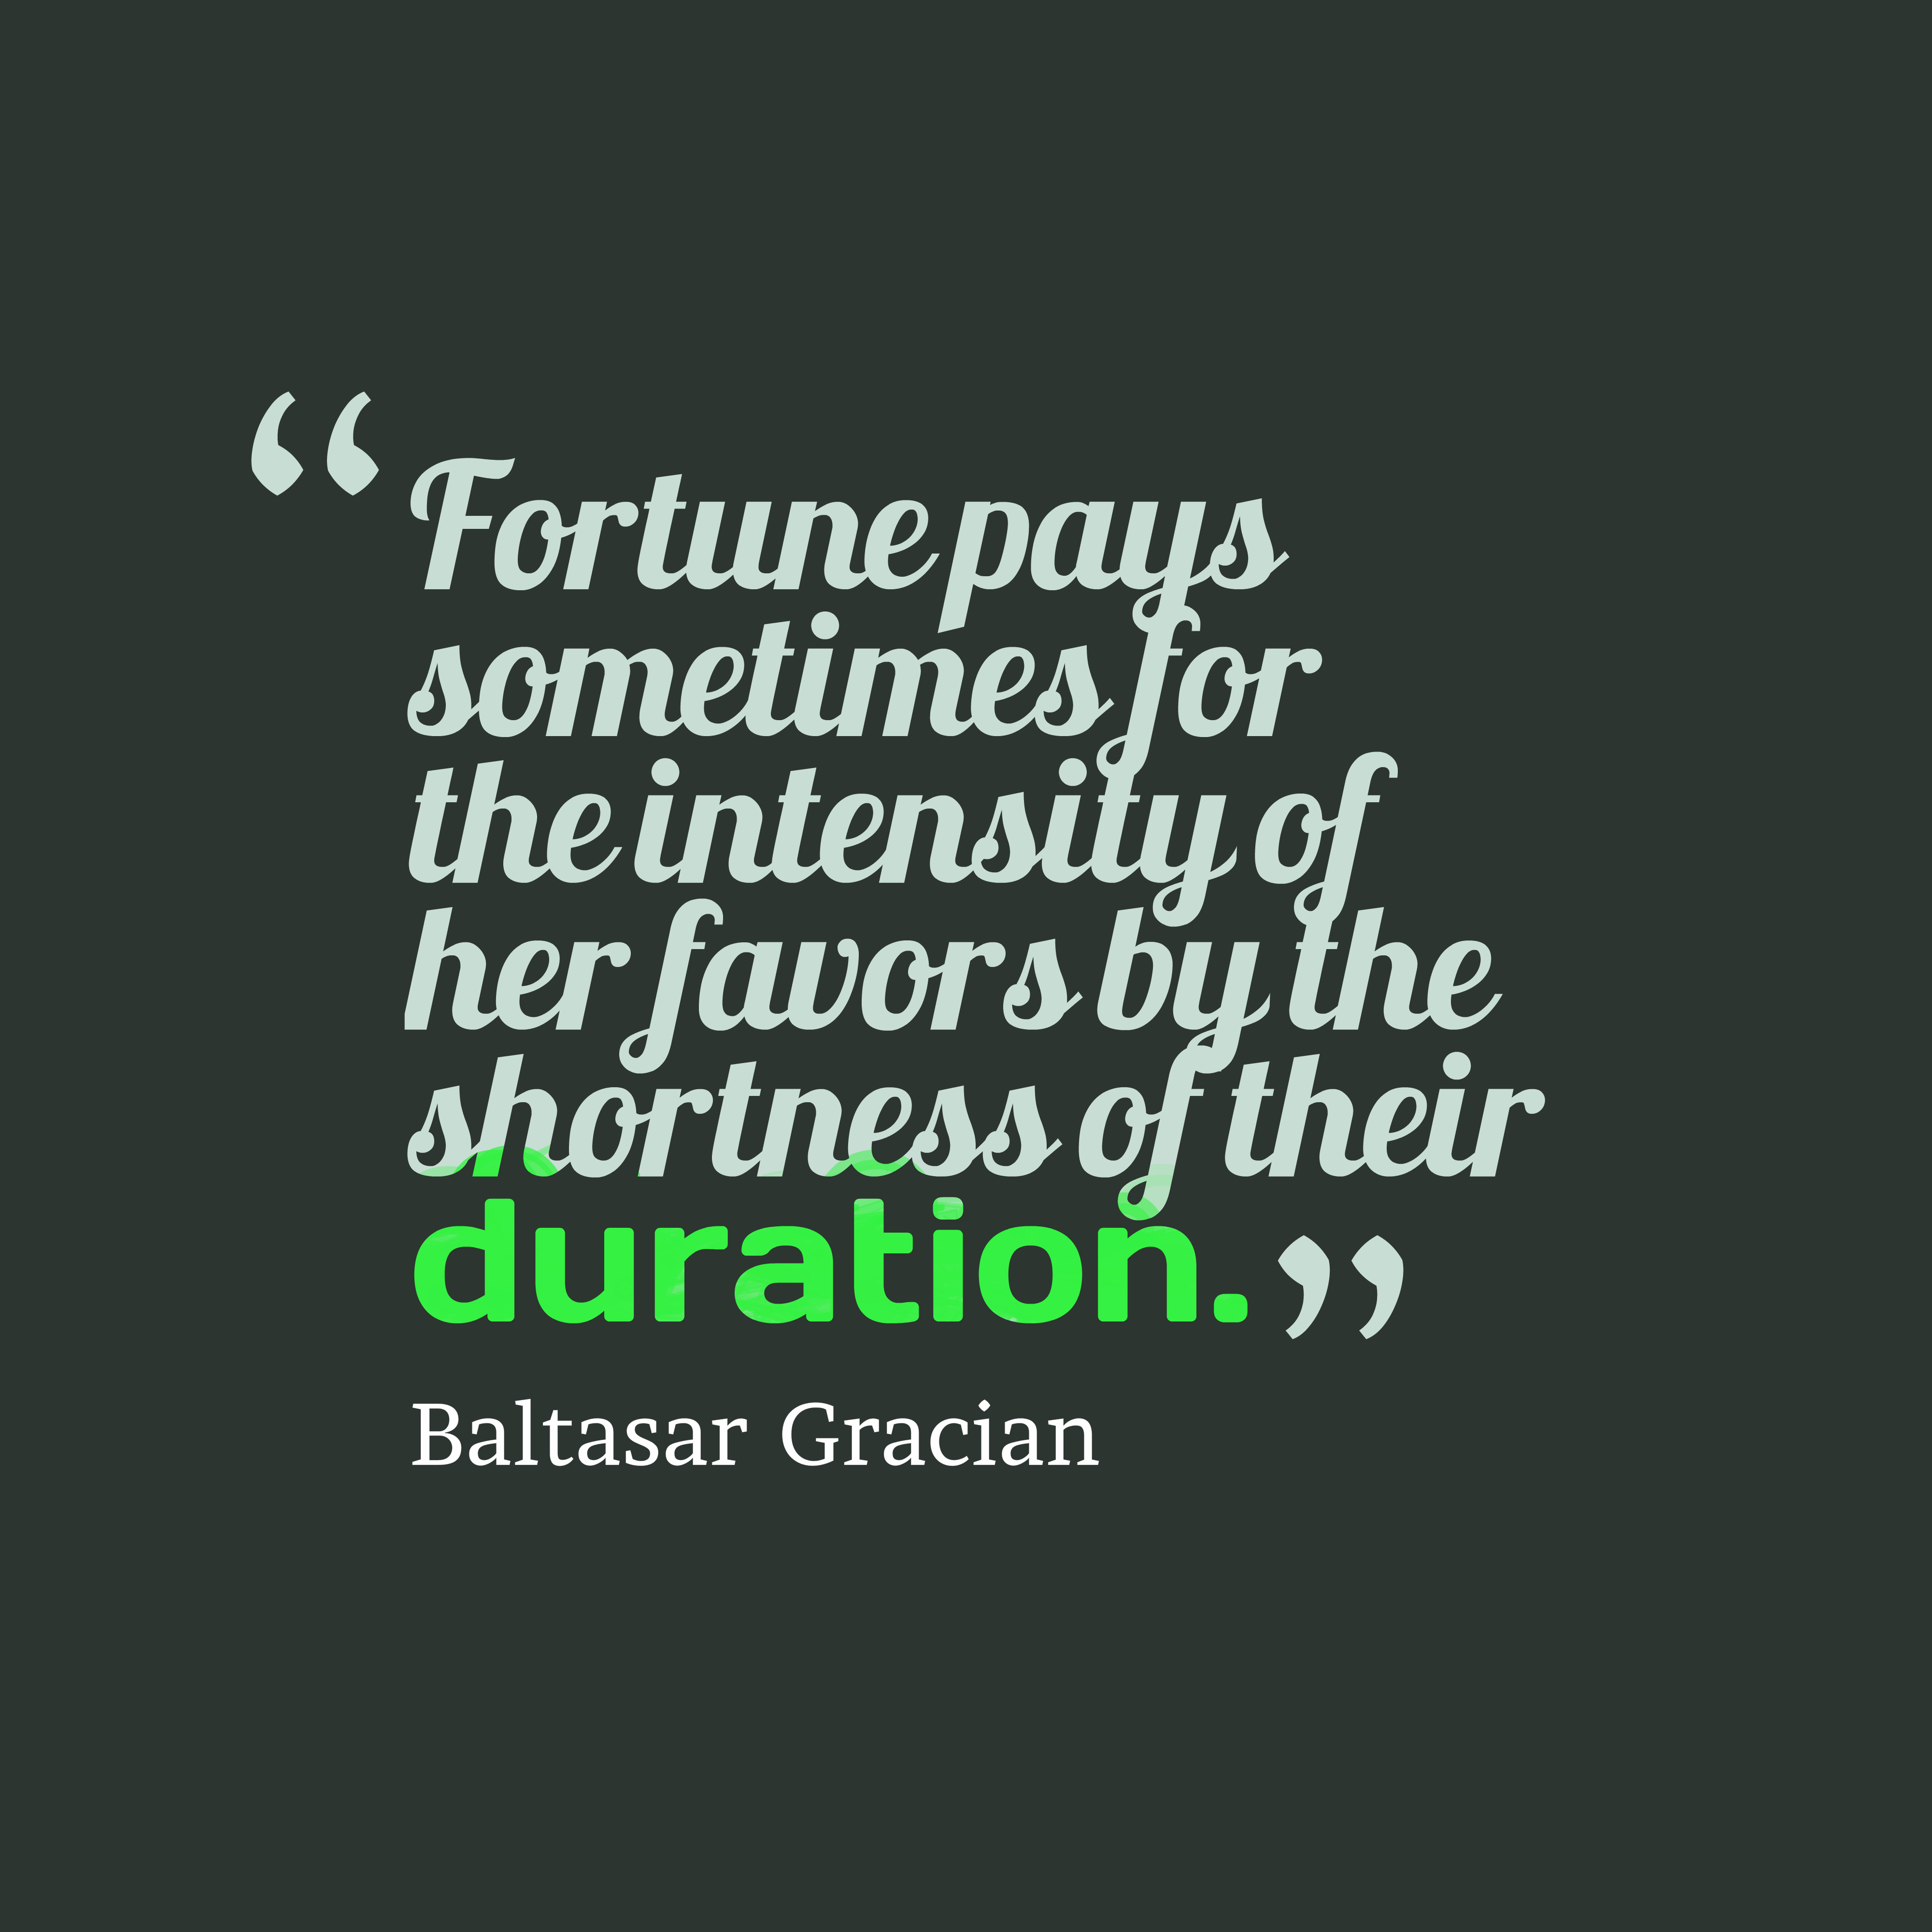 Fortune pays sometimes for the intensity of her favors by the shortness of their duration. baltasar gracian